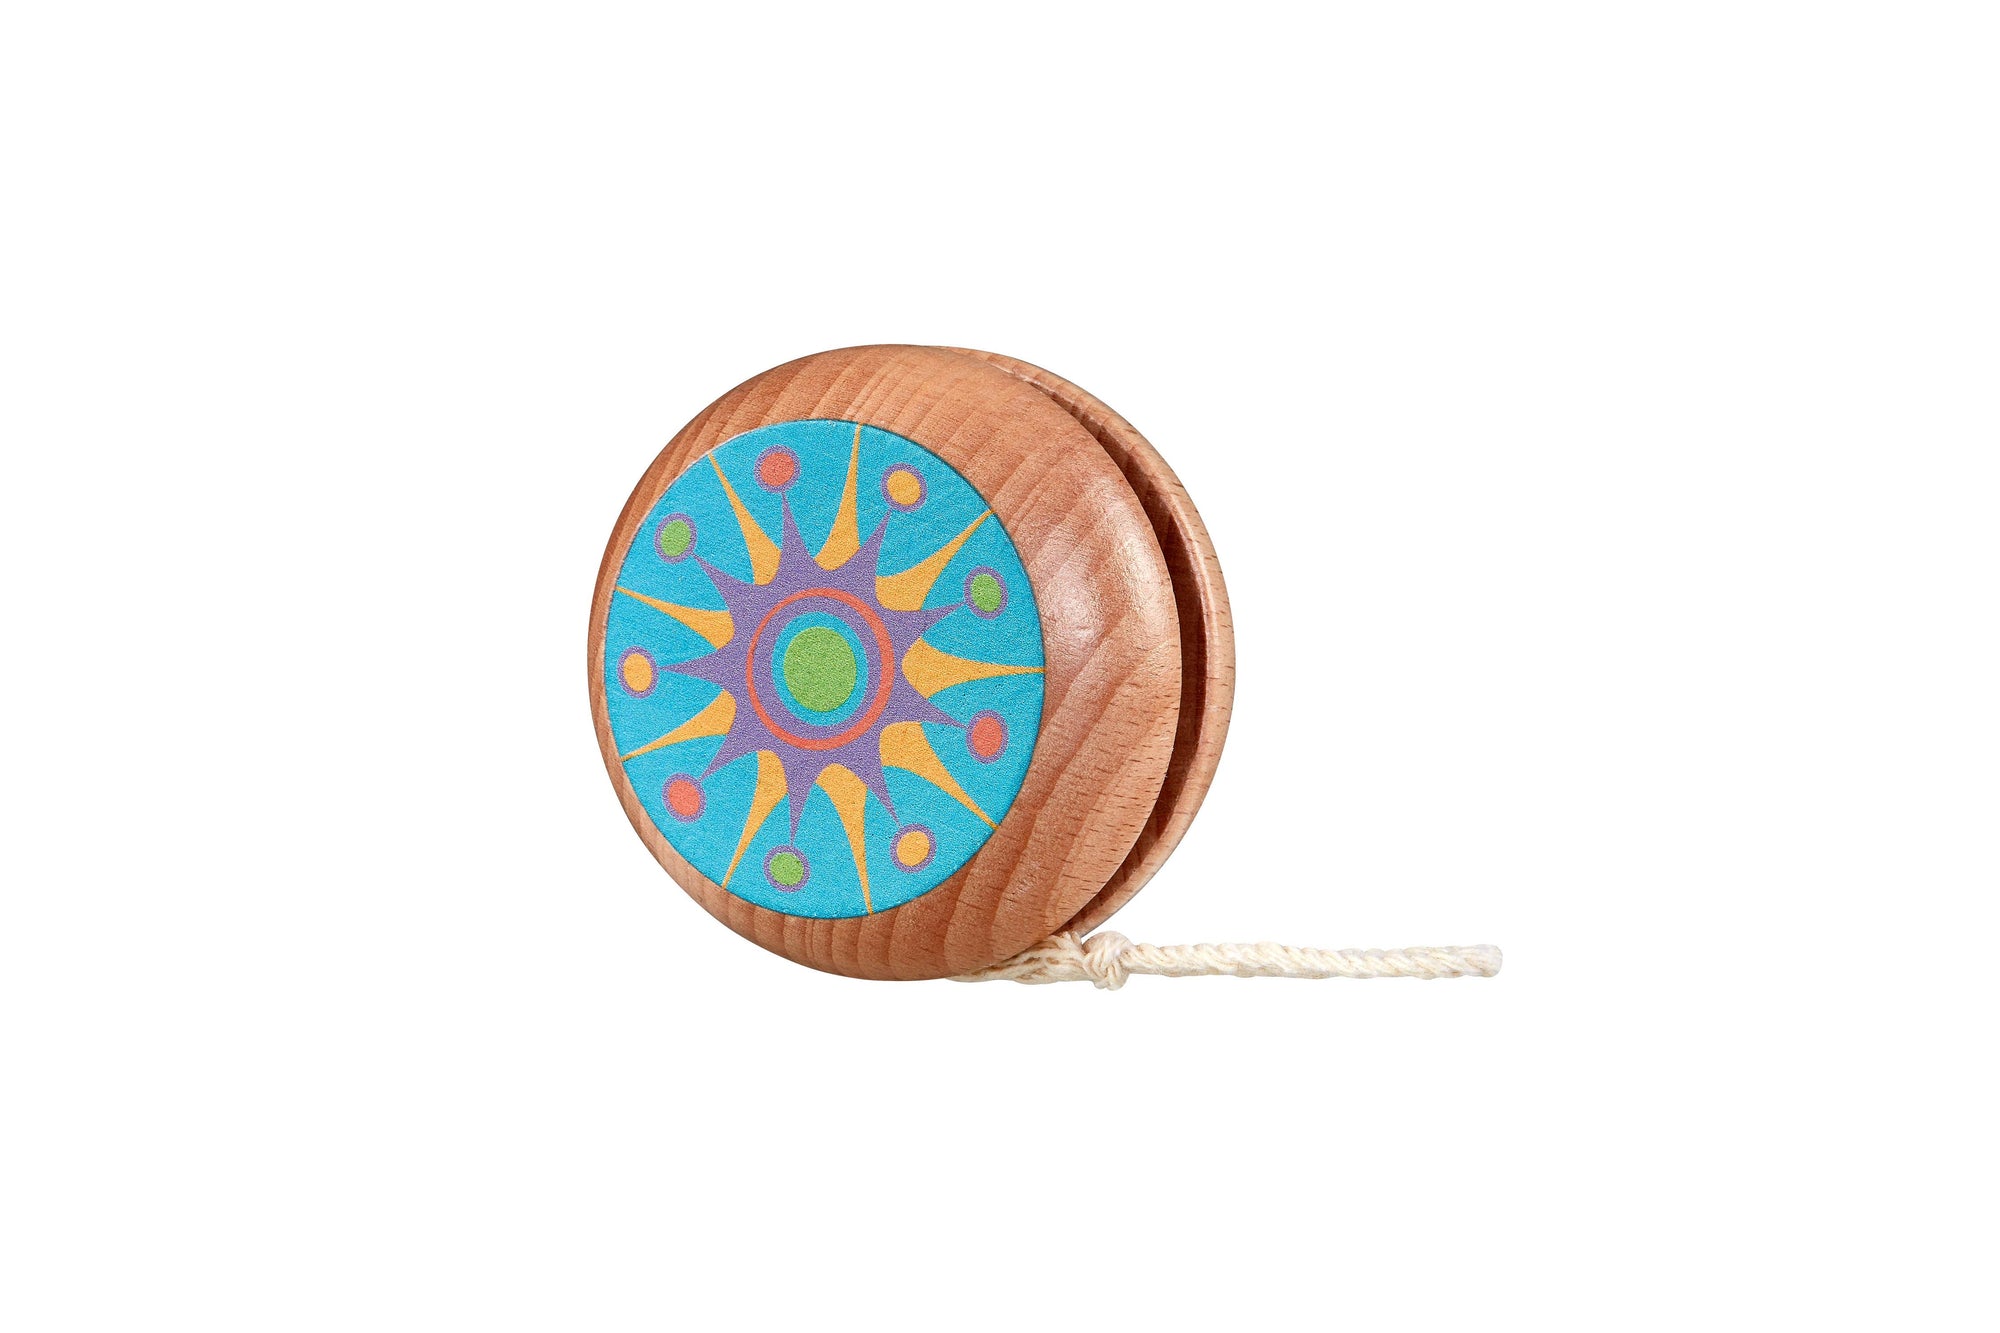 Sentence with replaced product name: Neato! Wood Yo-Yo with a colorful geometric pattern on the side, isolated on a white background.